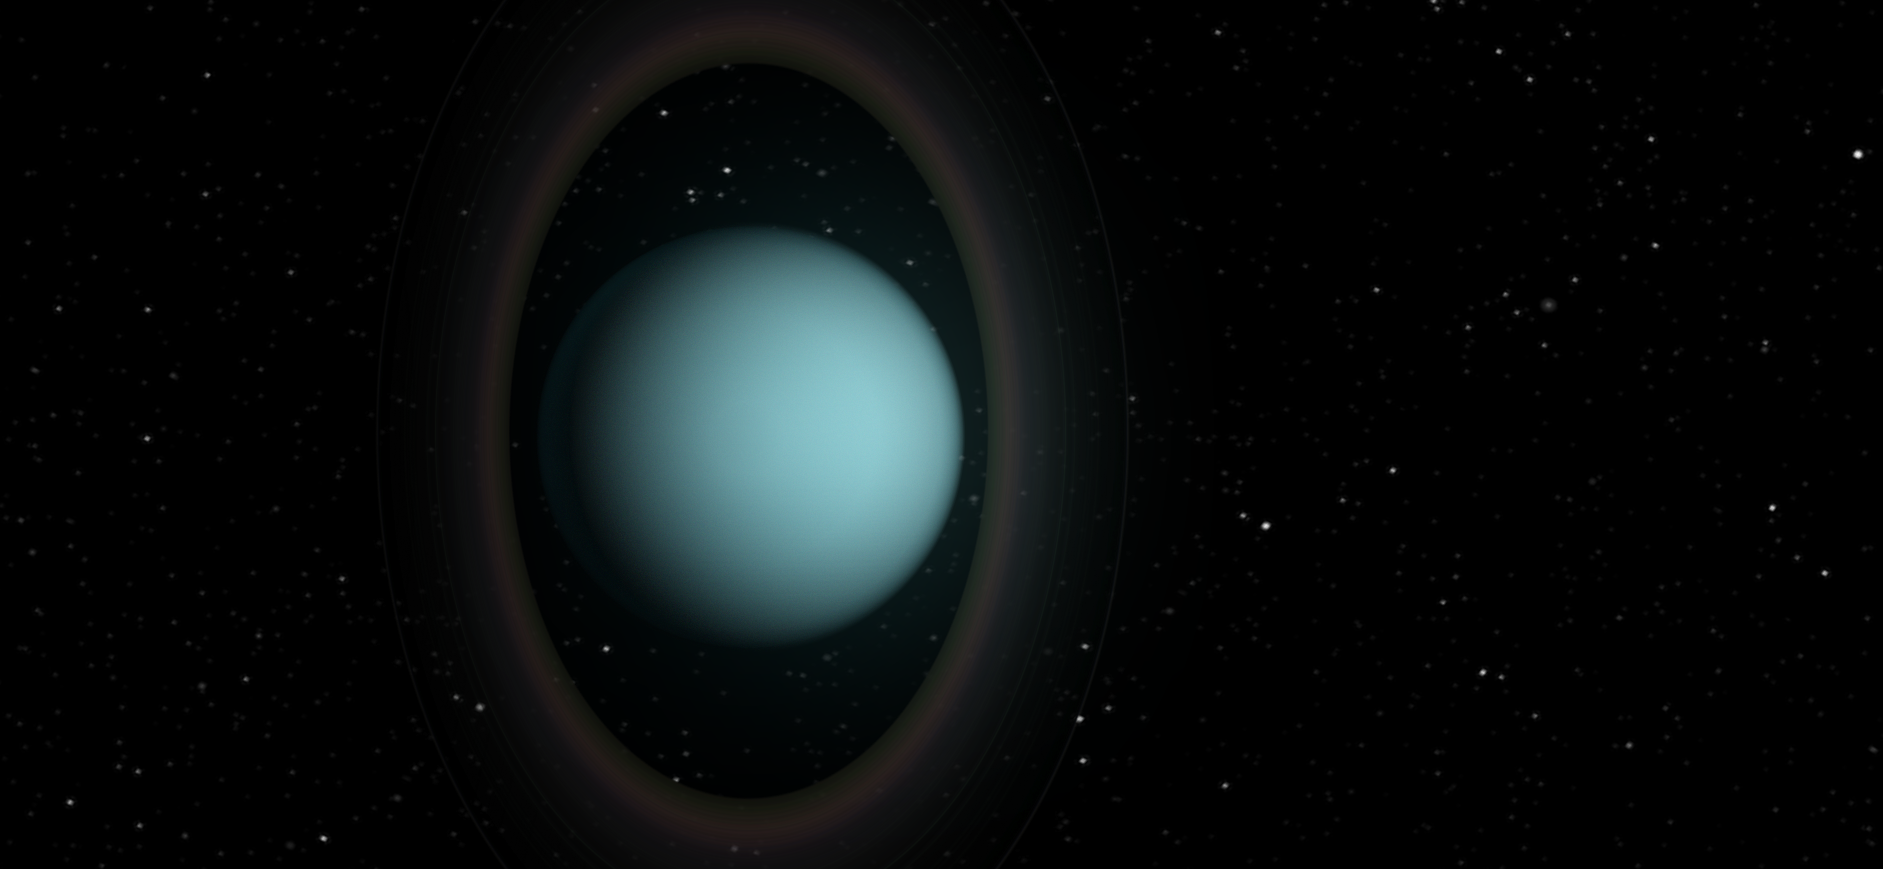 A Silhouette Of Planet Uranus And Its Rings, With The Sun Behind It, Then  Orbiting Around To Reveal The Bright Side Of Uranus. Includes A Glowing  Atmosphere, Lens Flare On The Sun,